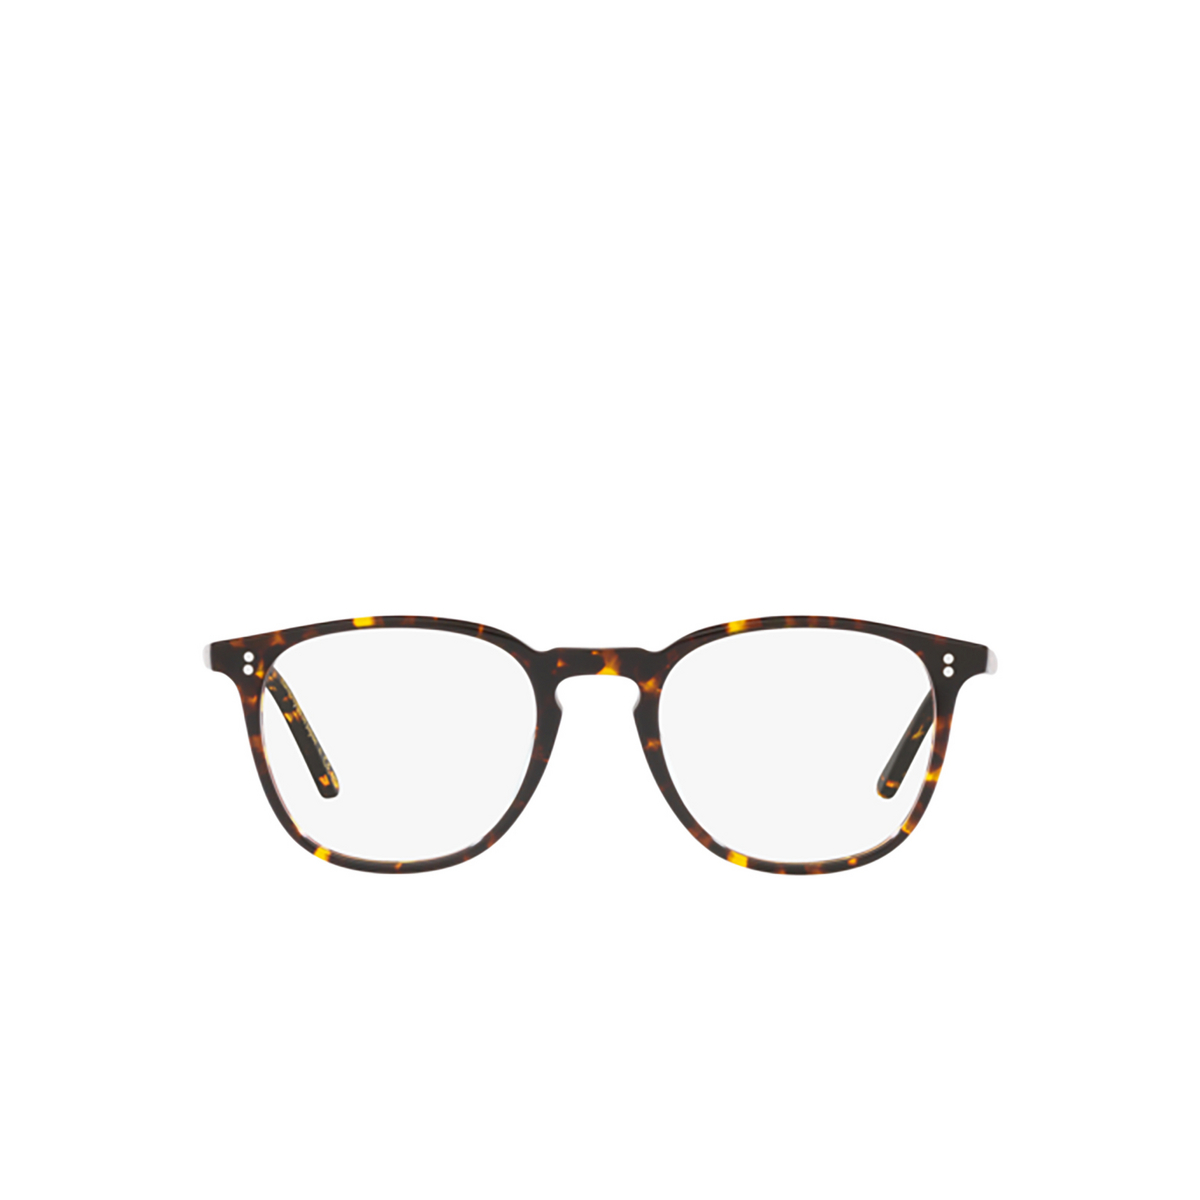 Oliver Peoples FINLEY 1993 Eyeglasses 1741 Atago Tortoise - front view